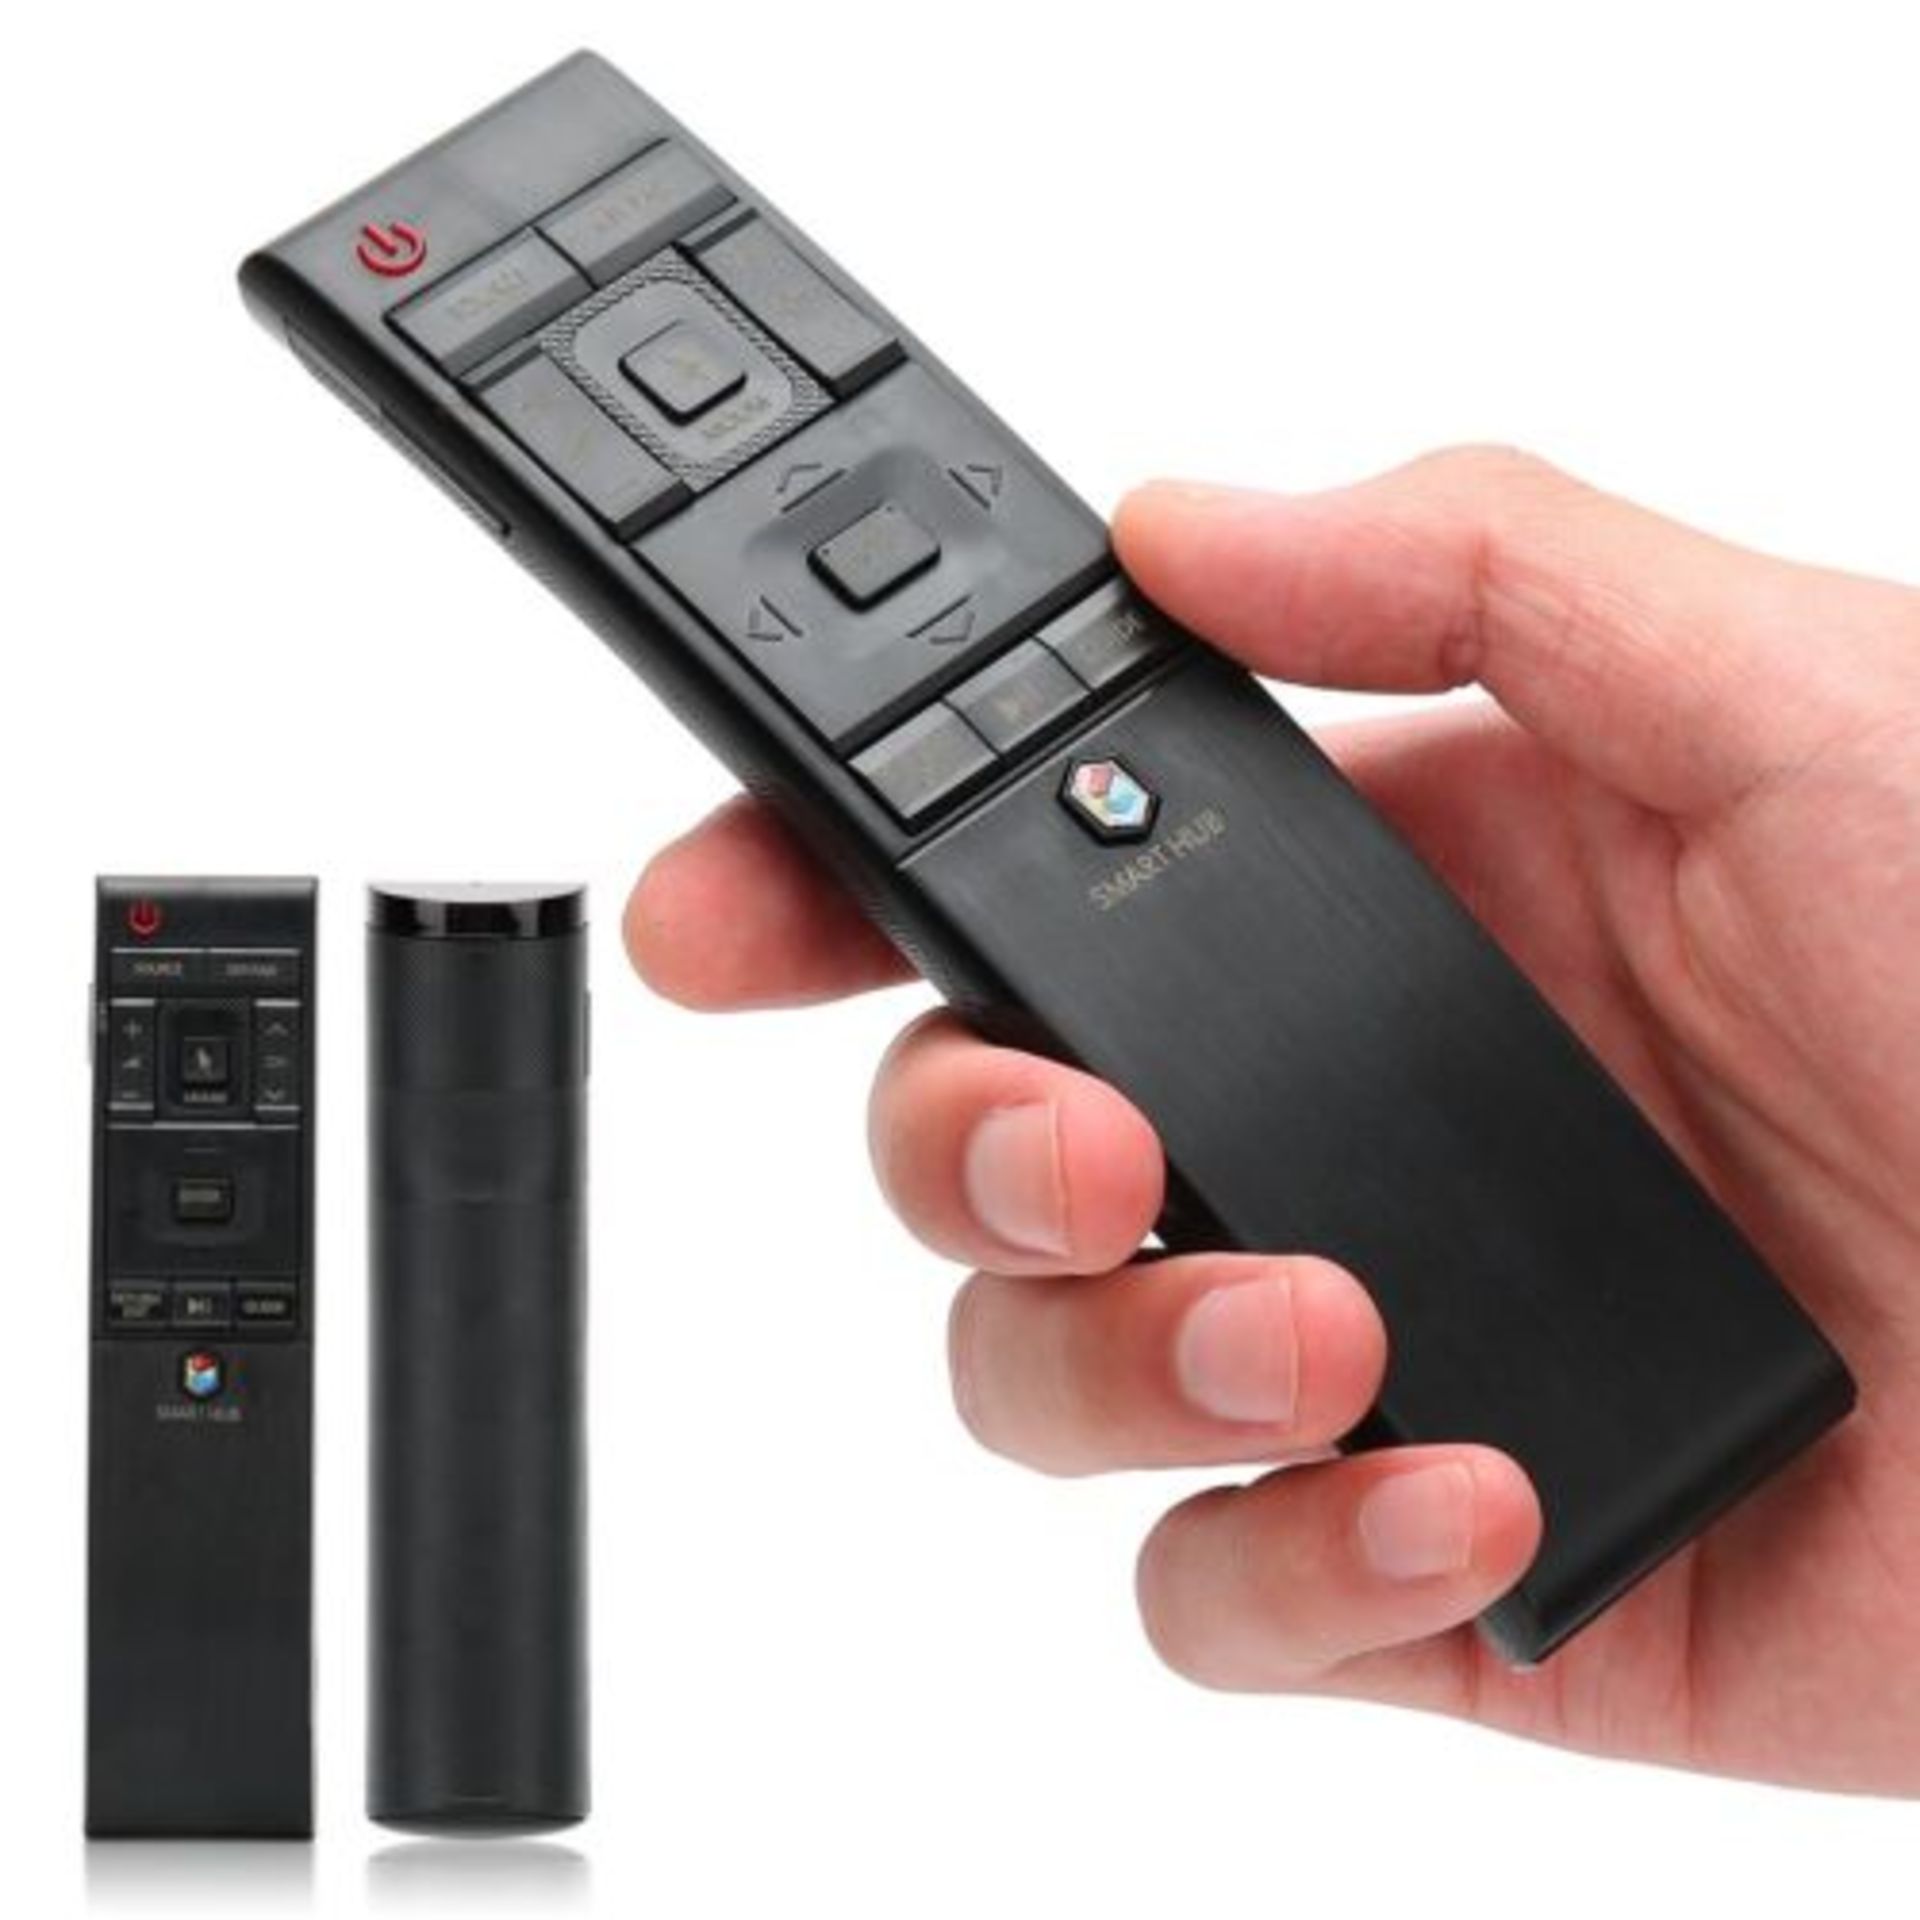 2X IHANDYTEC SMART TV REMOTE BN-1220 FOR SAMSUNG SMART TV WITH USB RECEIVER - Image 5 of 8